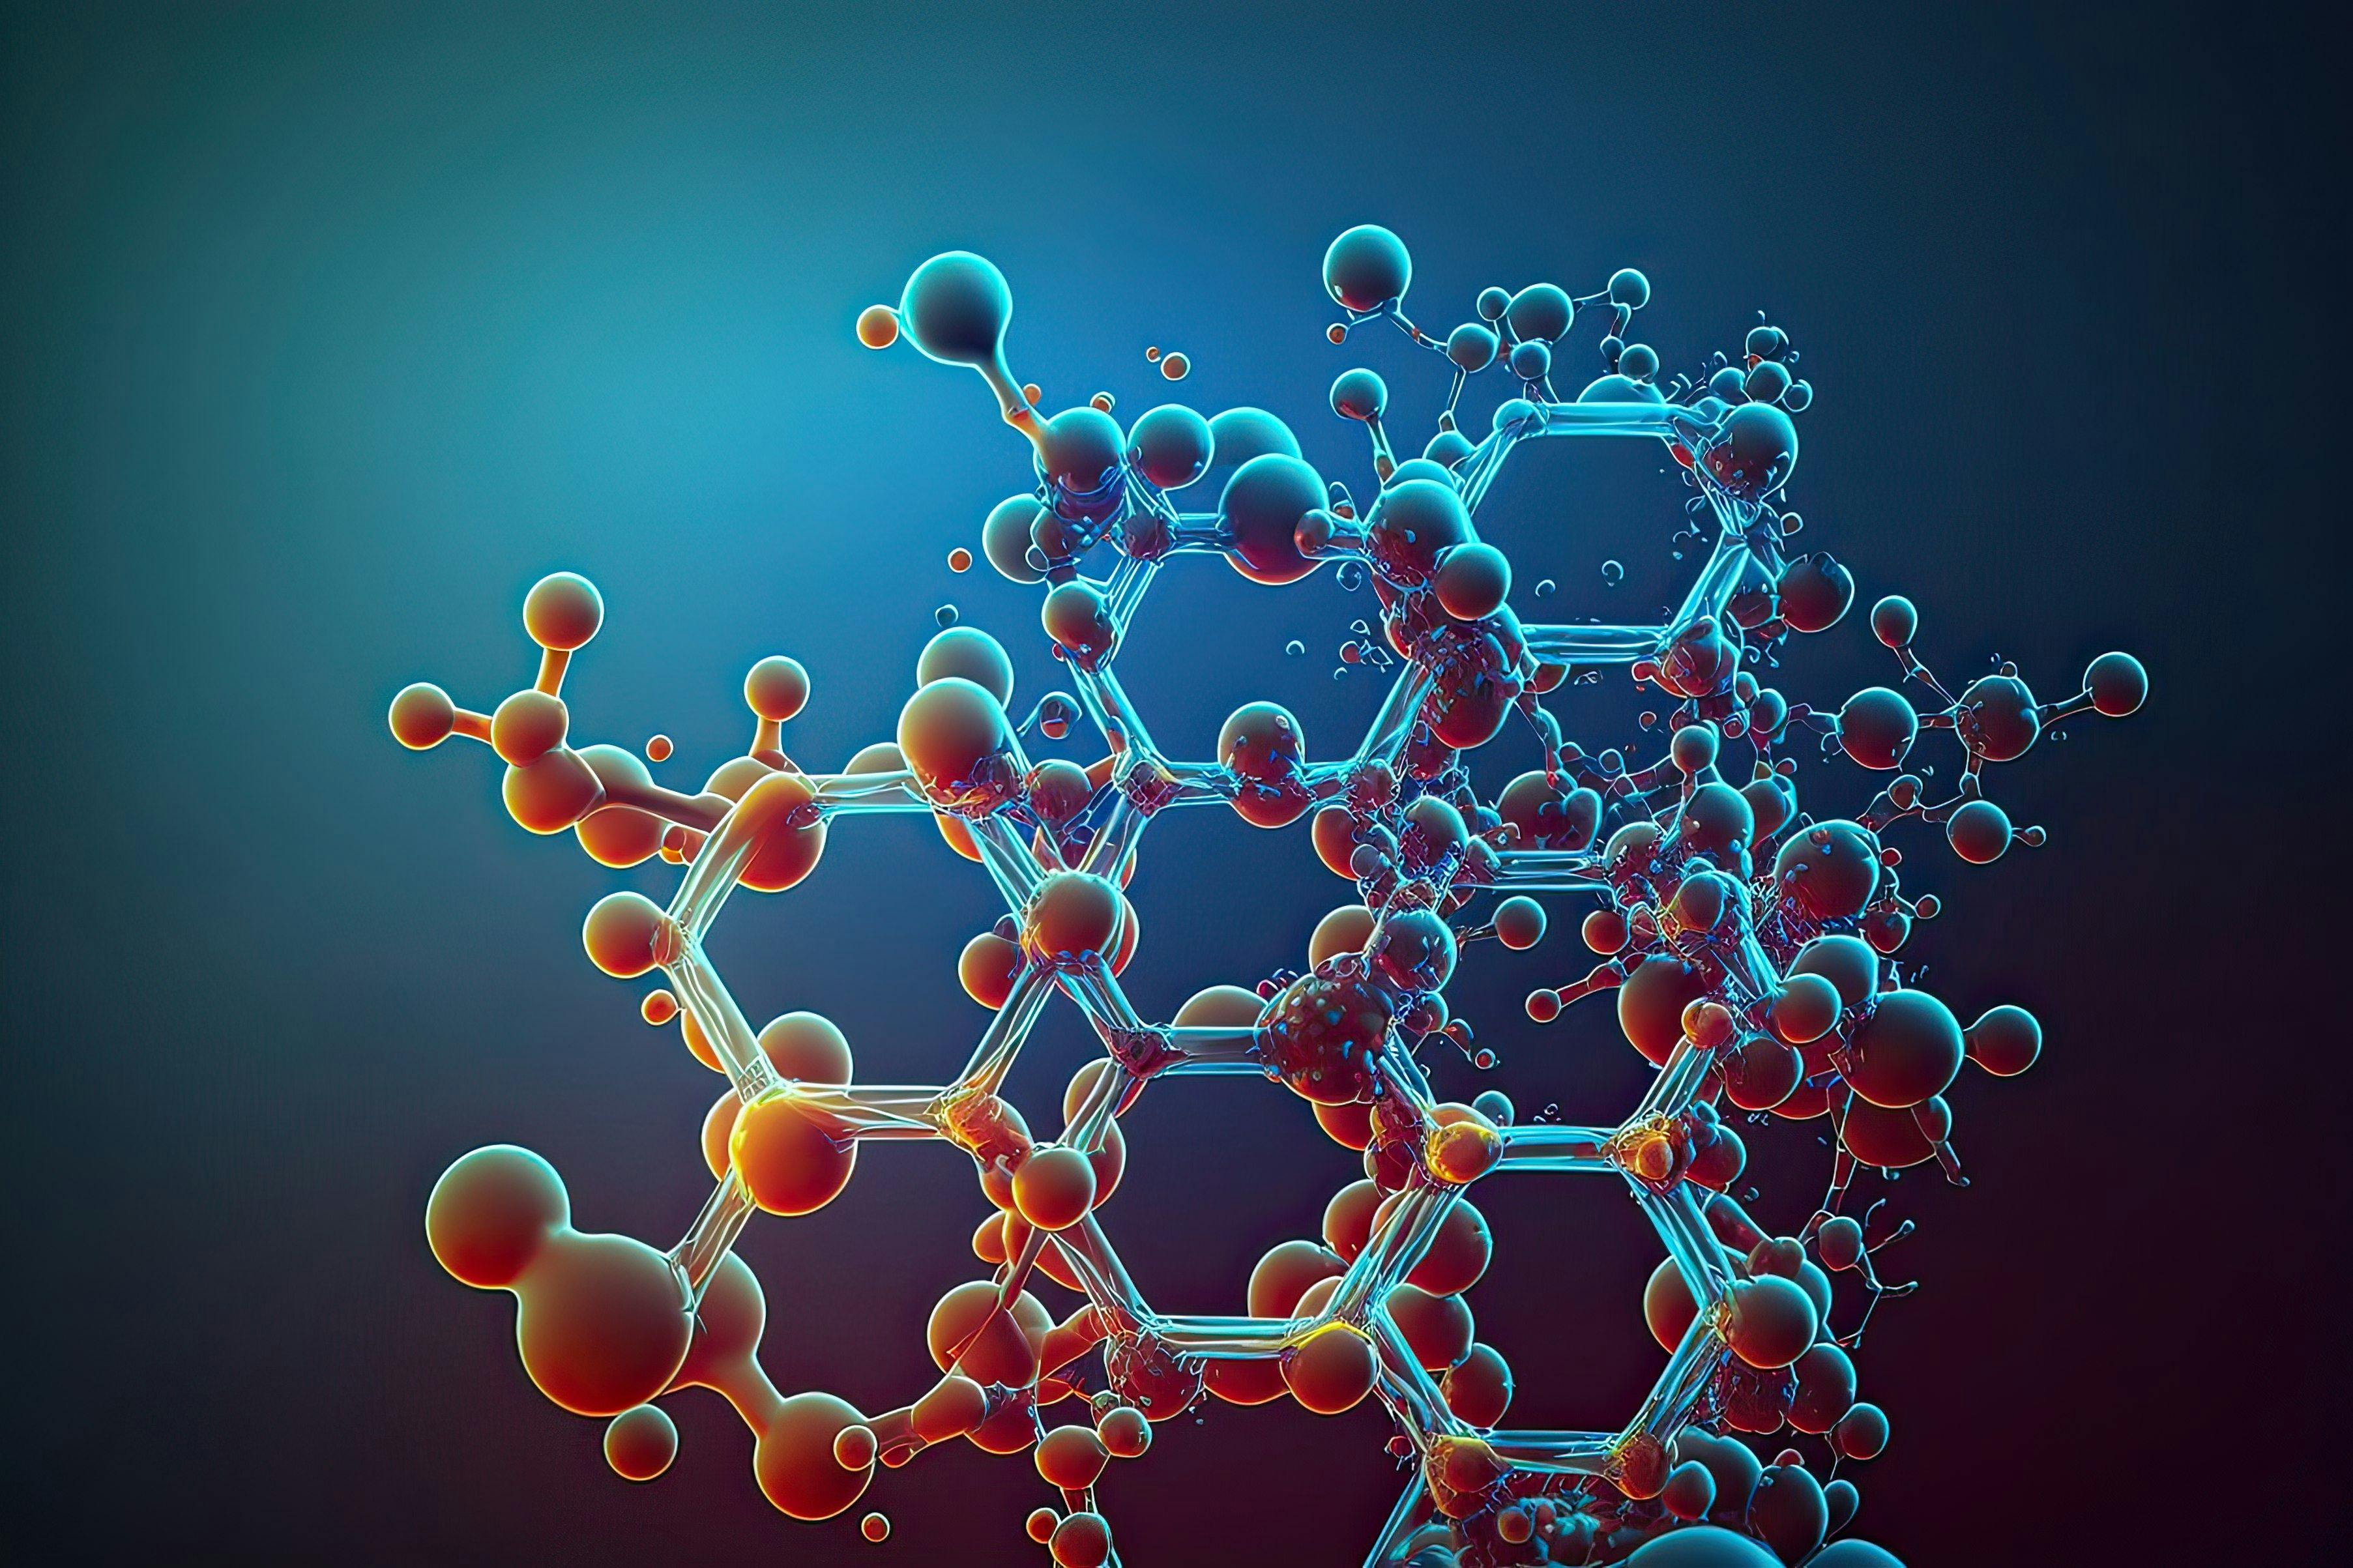 Innovative Science and Technology: Exploring Abstract Molecular Structures. Photo AI | Image Credit: © pixardi - stock.adobe.com